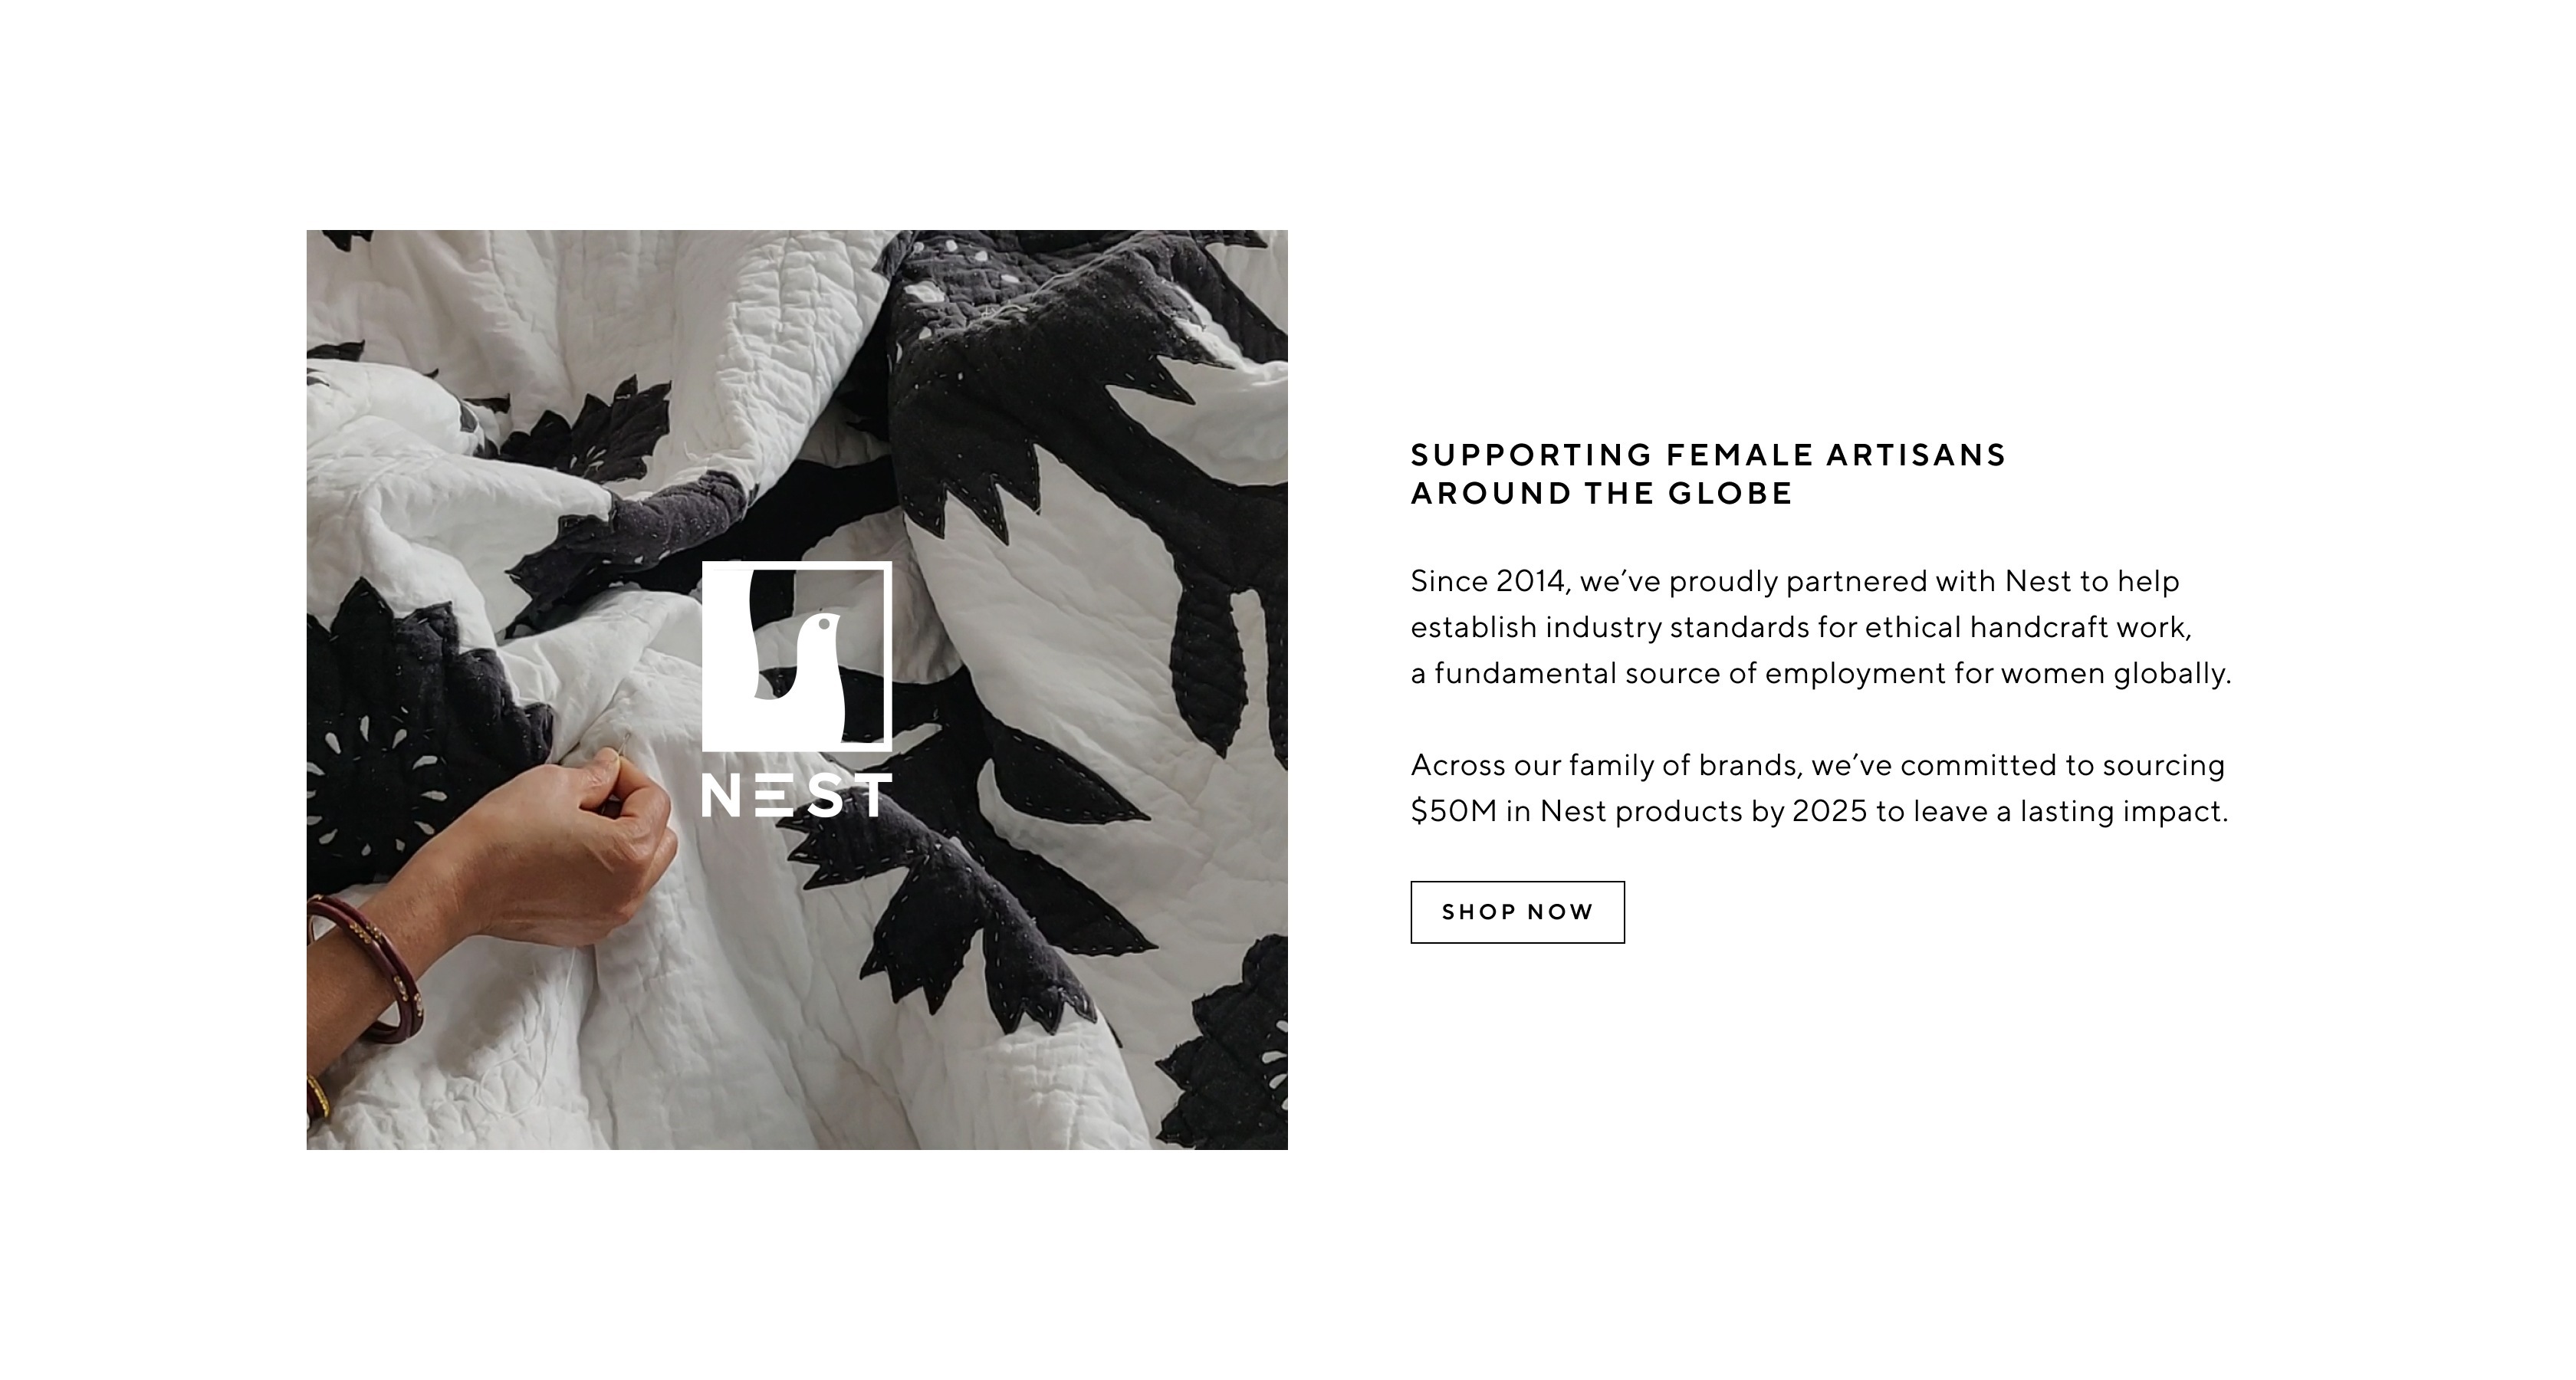 Support Femal Artisans Around the Globe > Across our family of brands, we've committed to sourcing $50M in Nest products by 2025 to leave a lasting impact. 